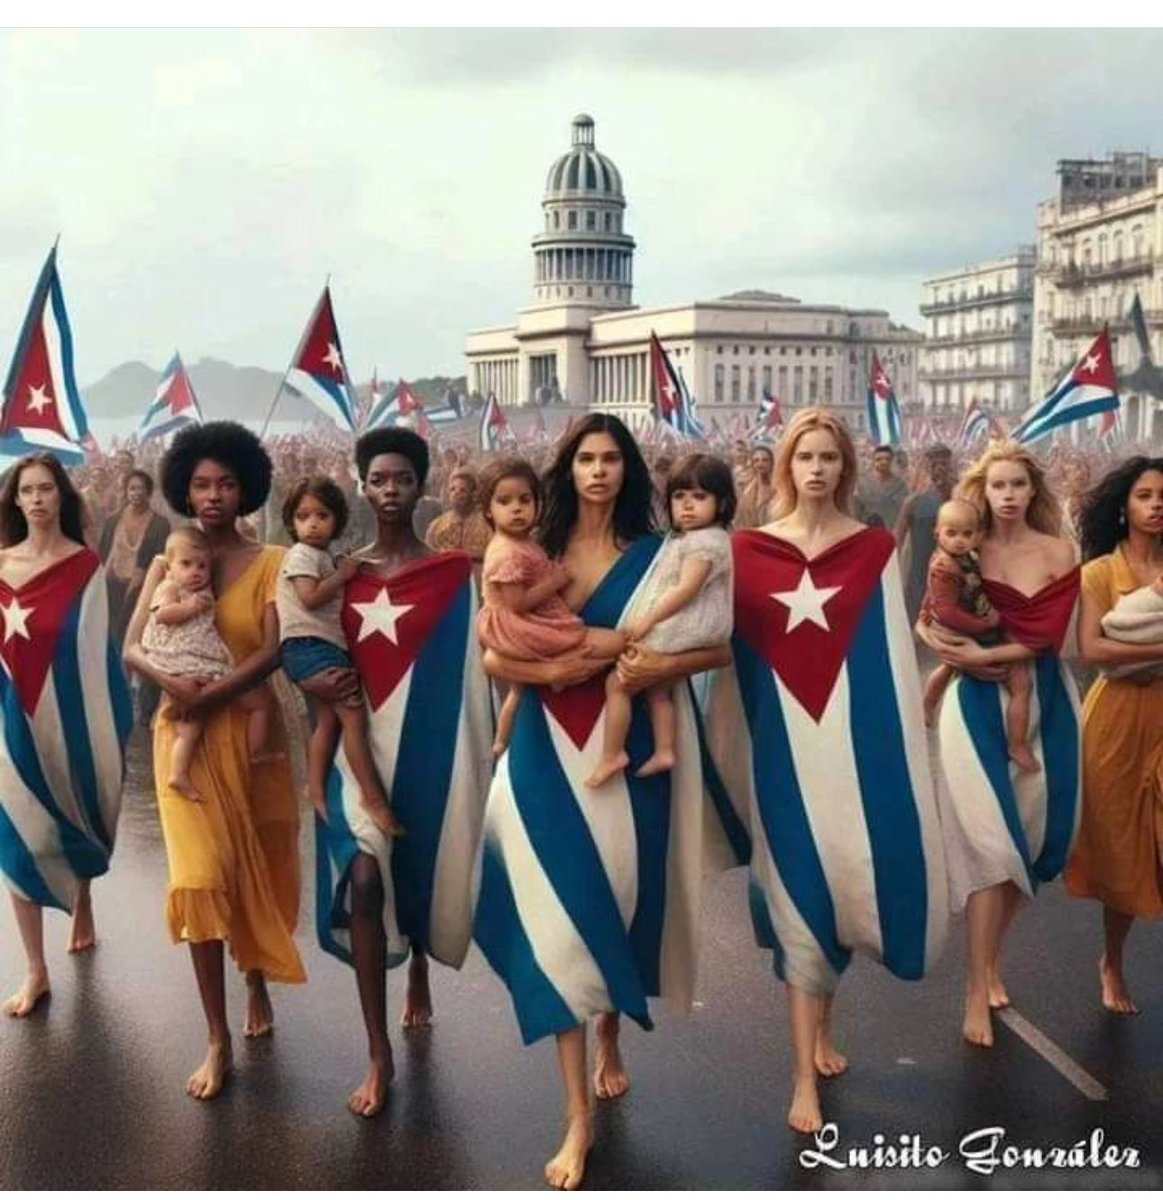 Cuban dictatorship ignores our mothers' pain, hunger, anguish, desperation, fear, suffering, and sadness. They abuse them and incarcerate their children. The world must unite to provide aid and pressure for change, amplifying voices against regime injustices. #SOS & Stand w/ CUBA